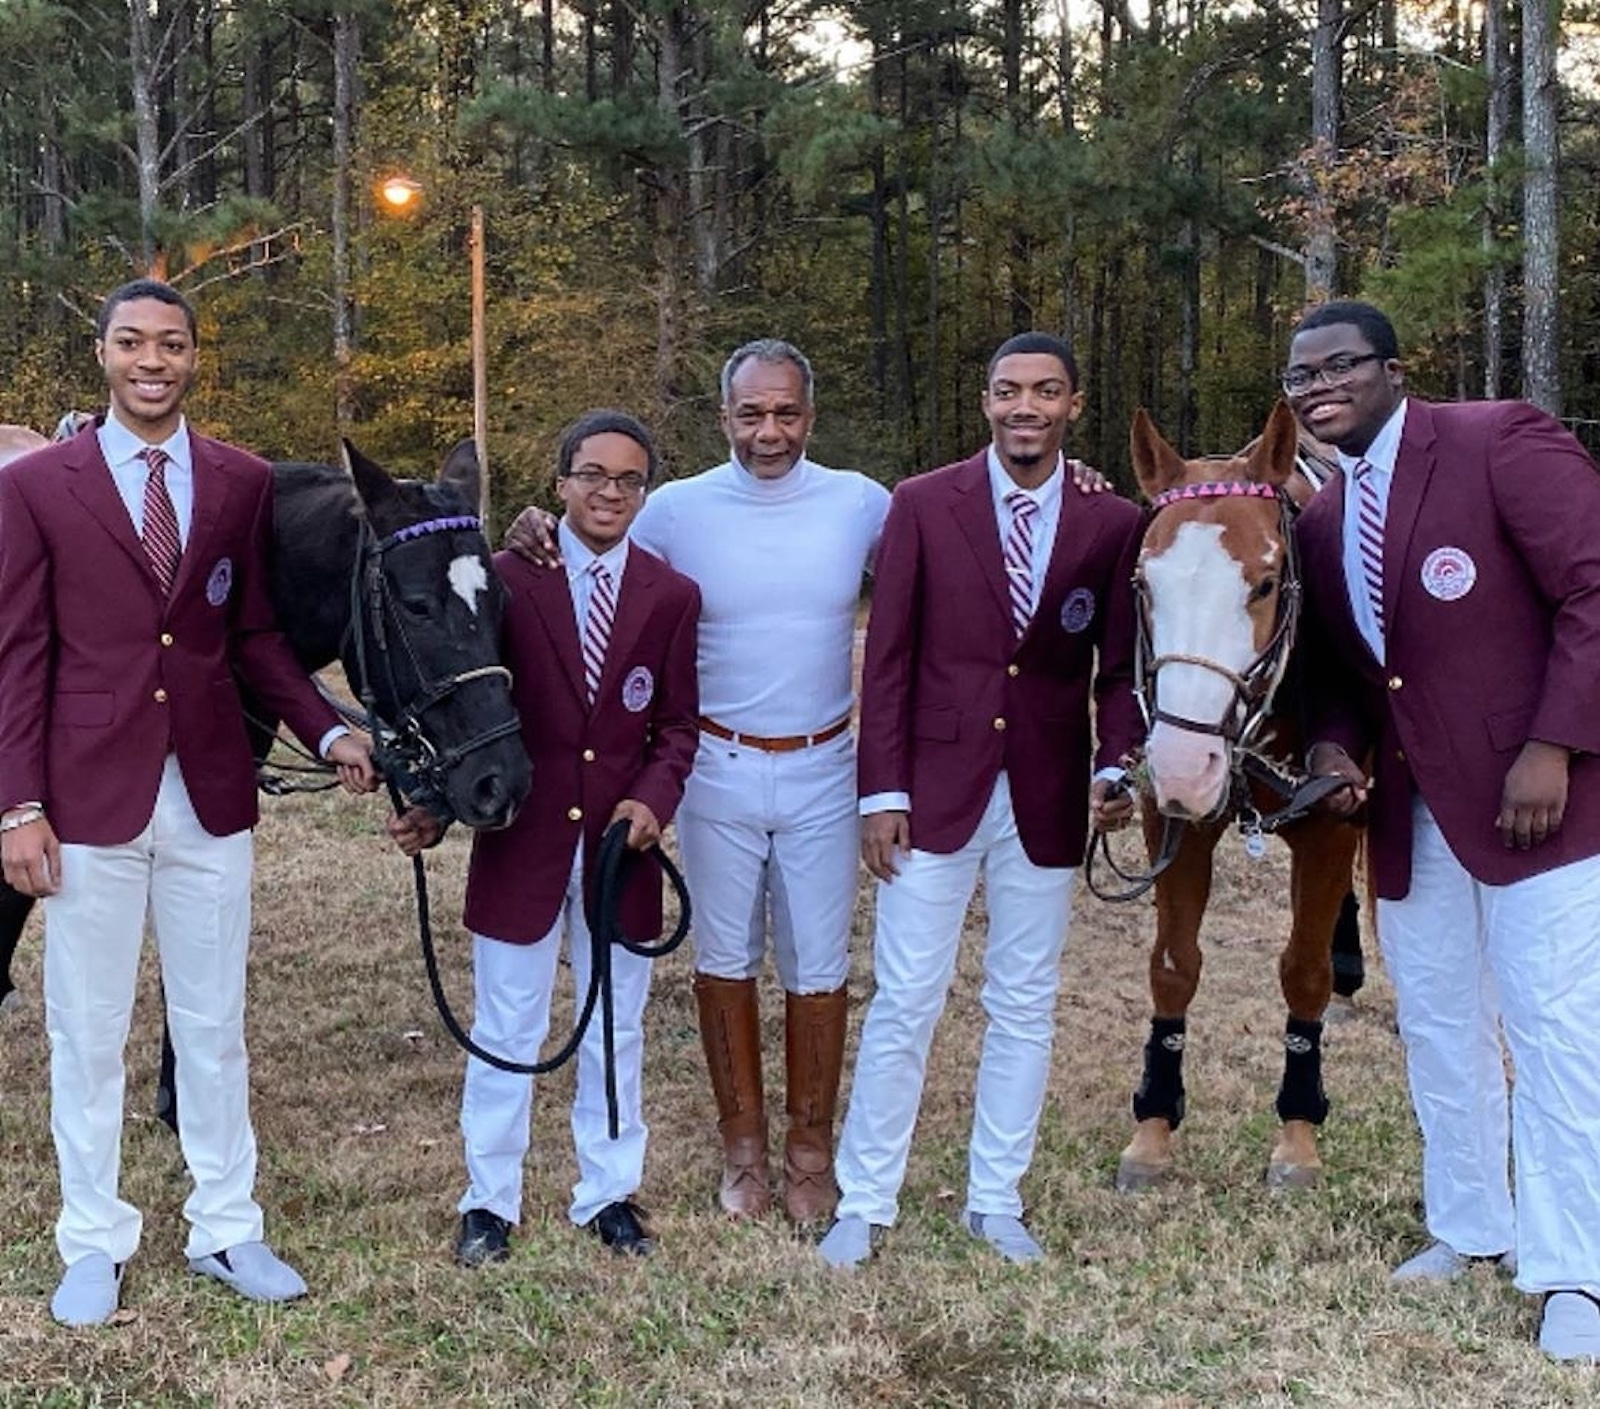 Morehouse Polo Team, HBCU, Historically Black Colleges & Universities, Black Colleges, African American Education, KOLUMN Magazine, KOLUMN, KINDR'D Magazine, KINDR'D, Willoughby Avenue, Wriit,